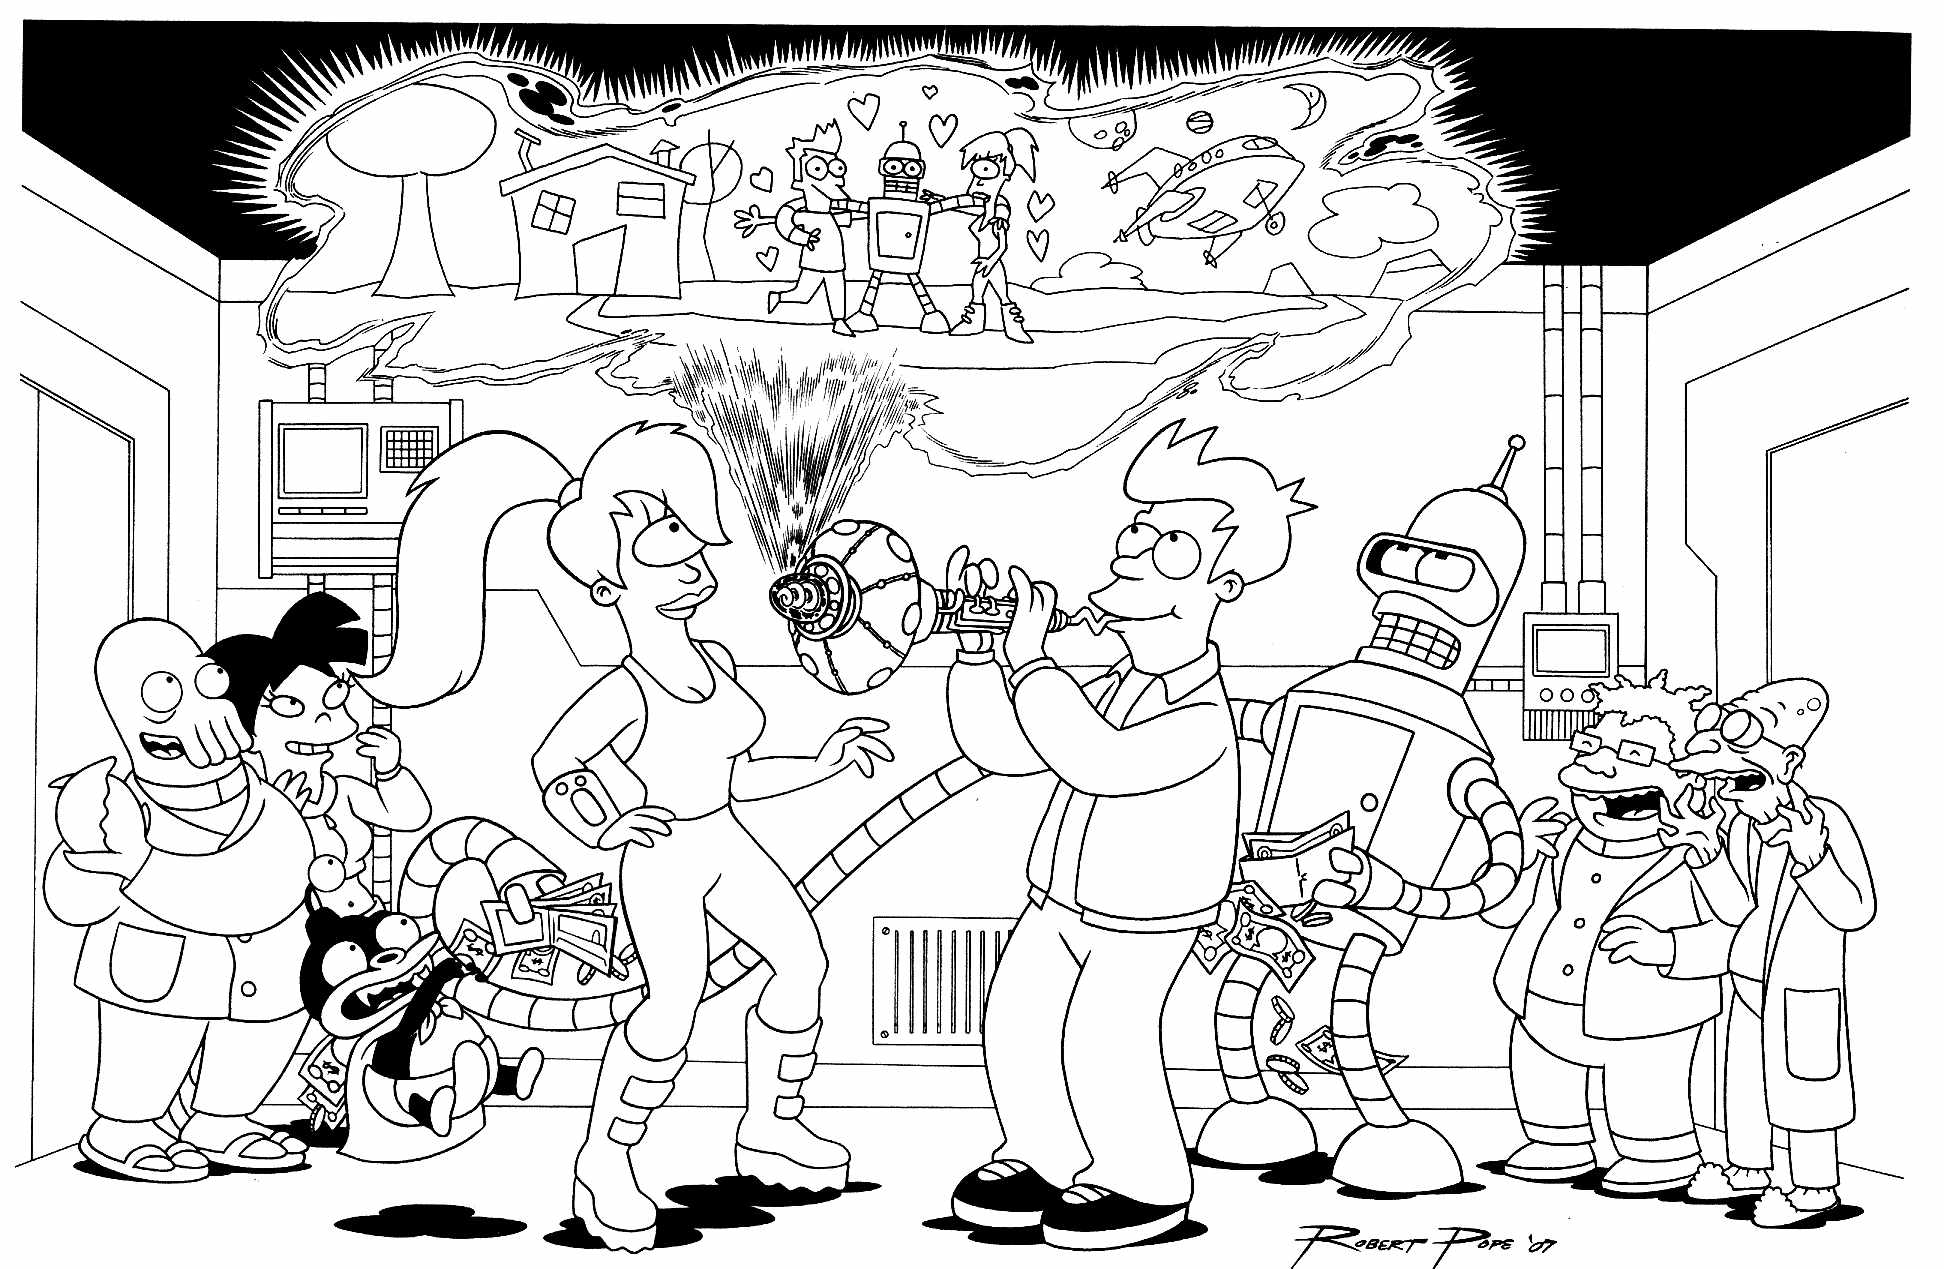 The main characters of Futurama gathered in a coloring page